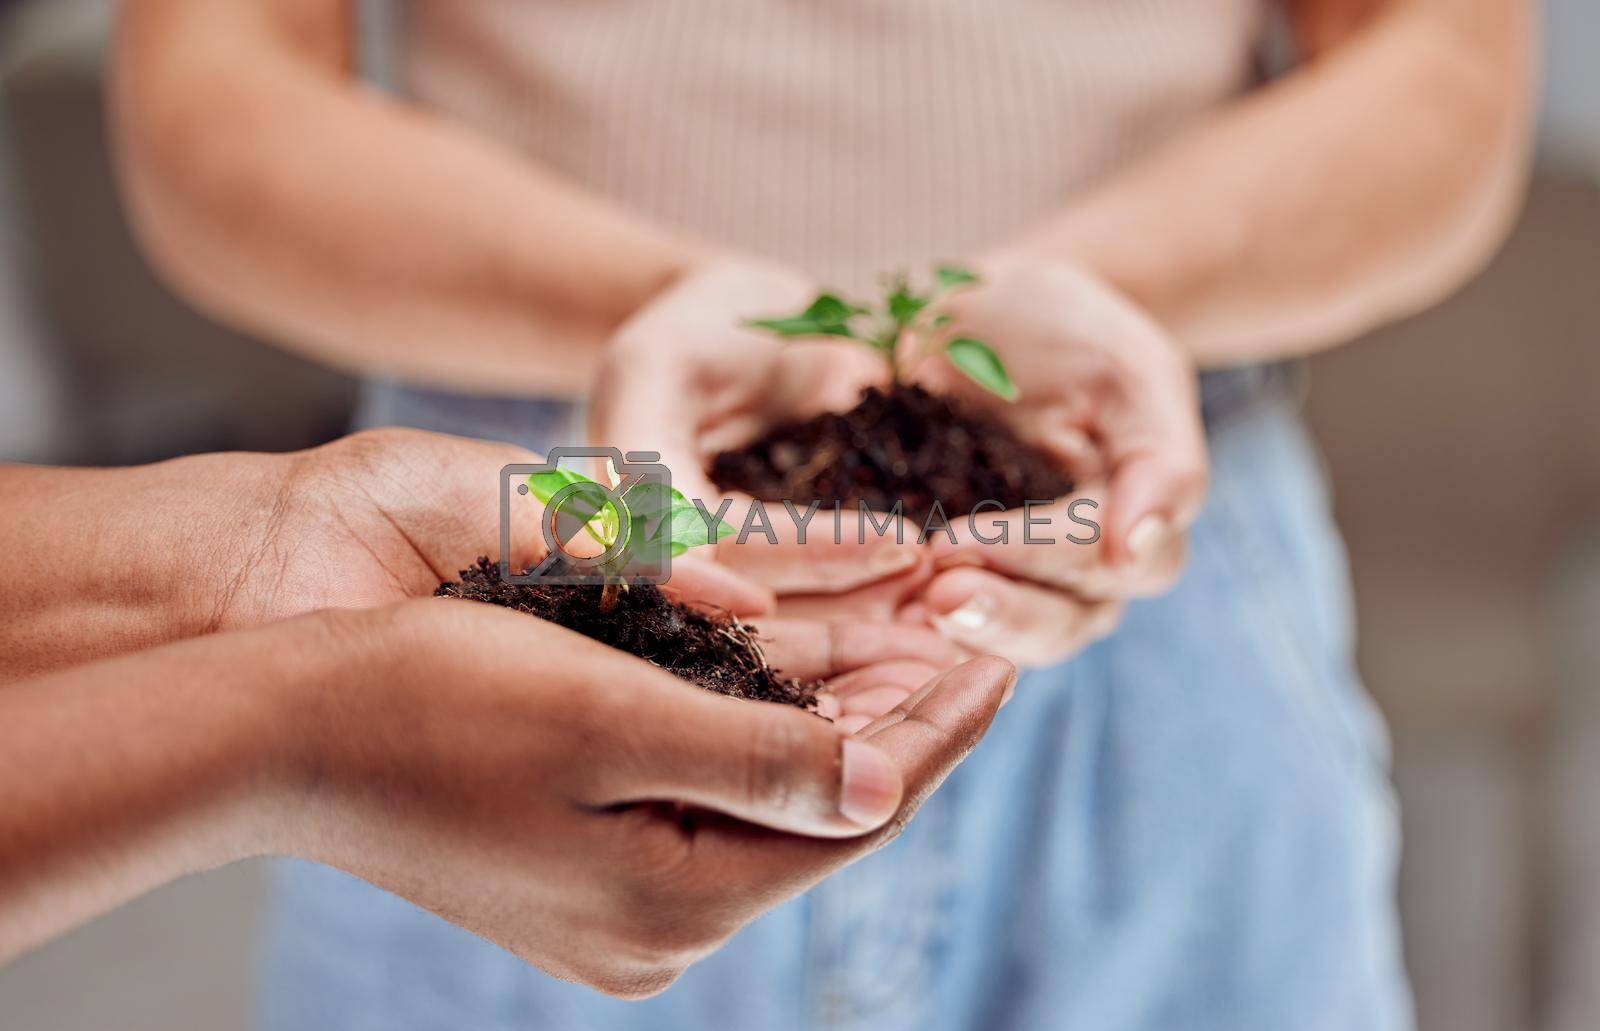 Cropped shot of two unrecognizable people holding plants growing out of soil.